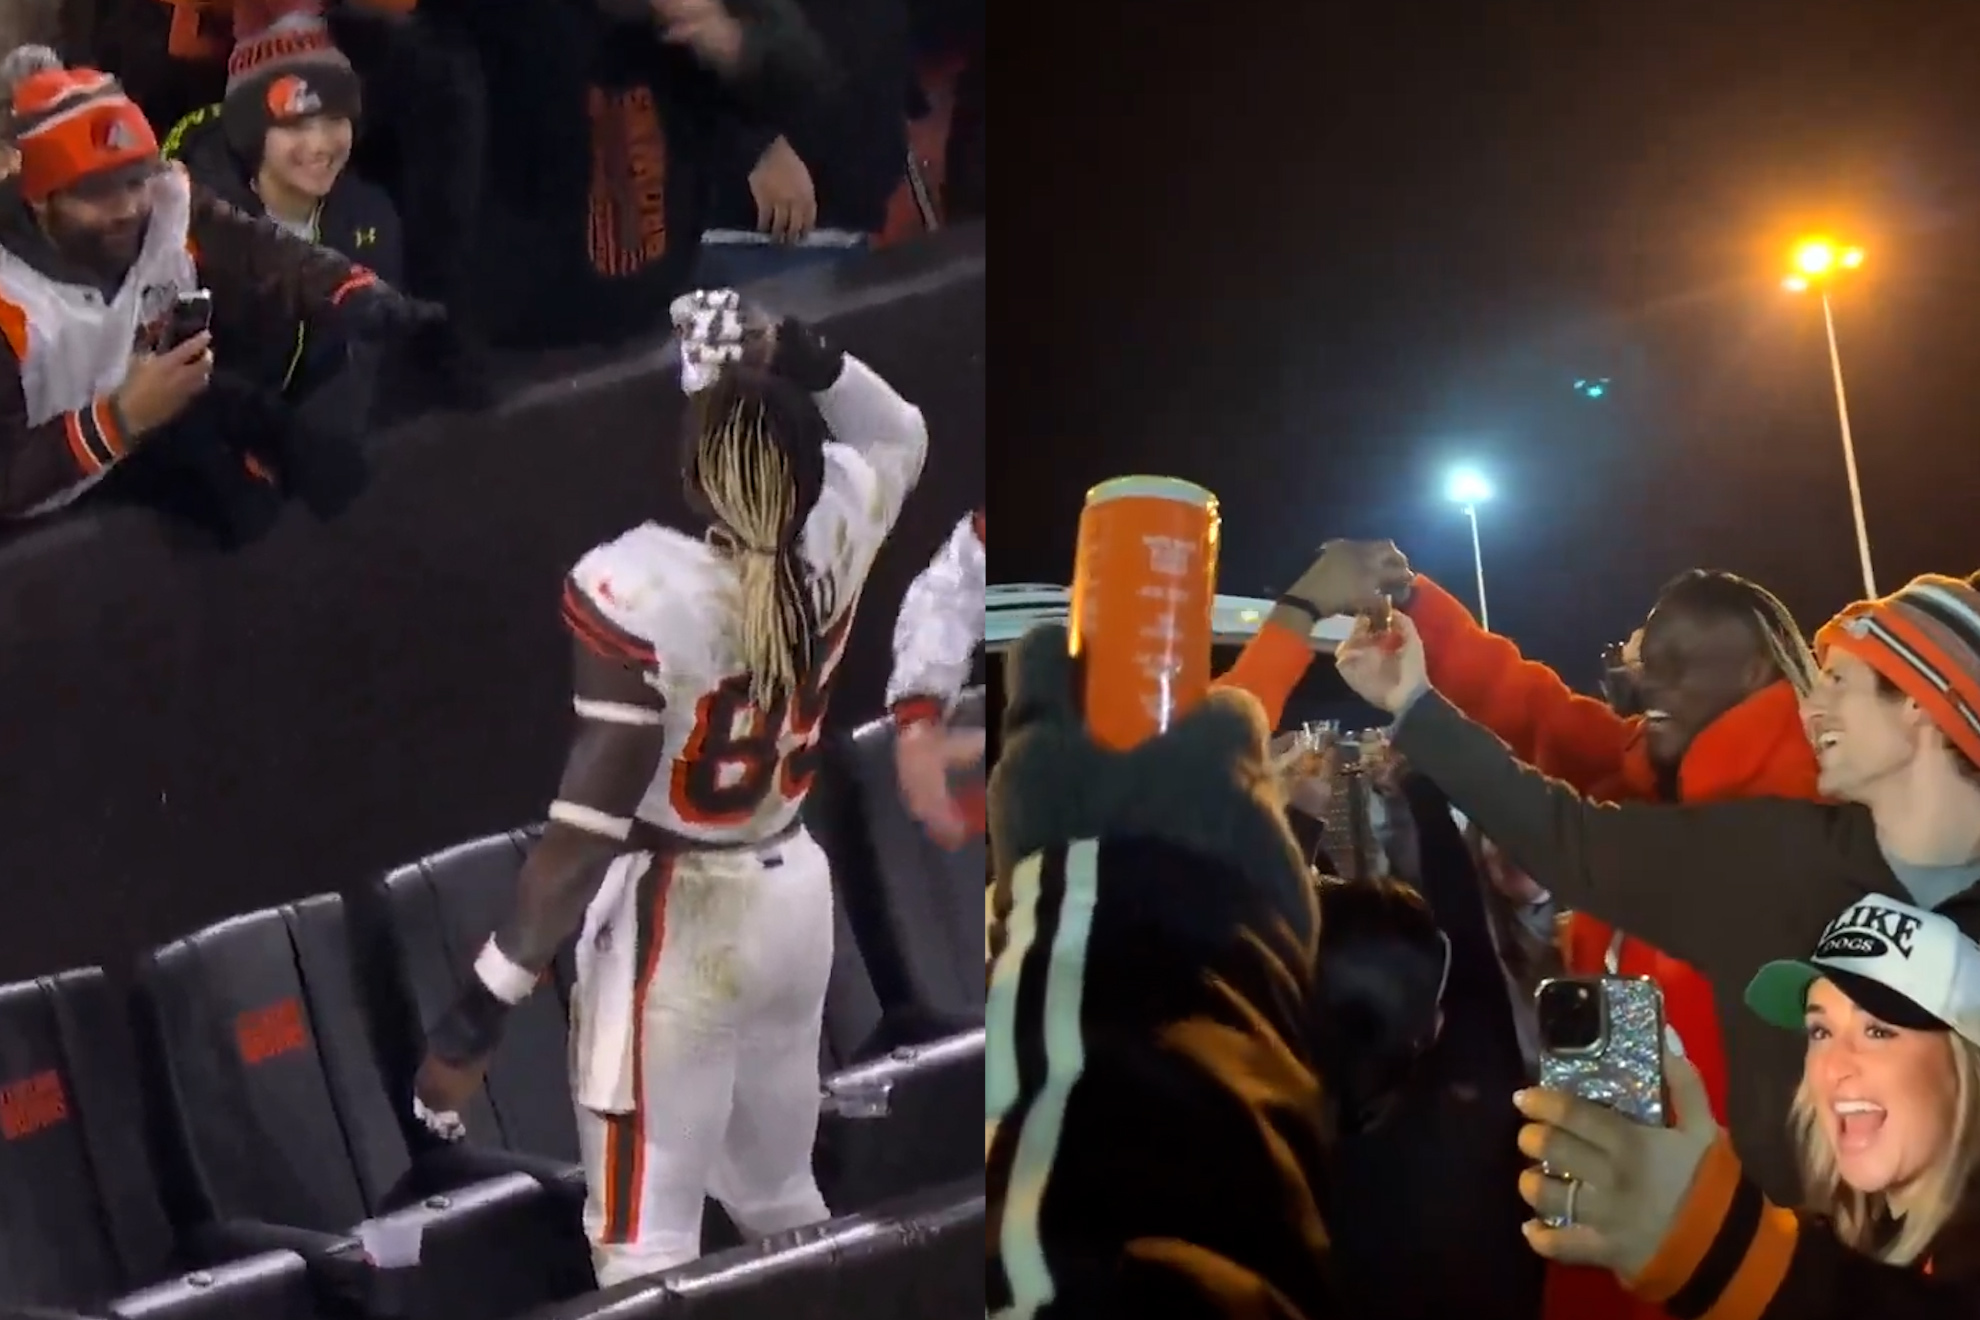 David Njoku toasts playoff berth with Cleveland fans after Jets win